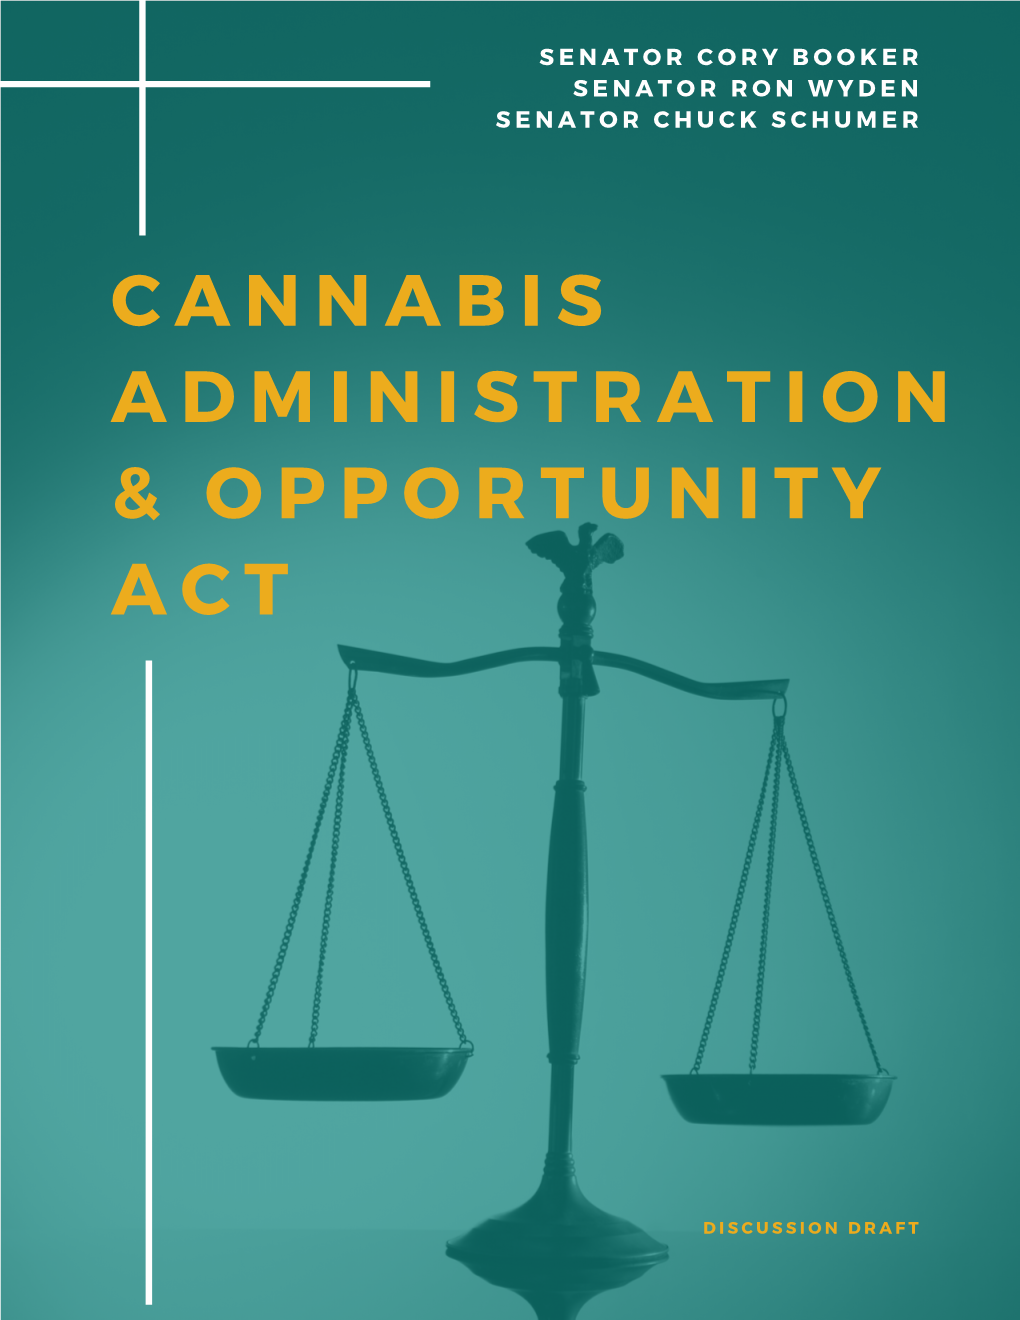 Cannabis Administration & Opportunity